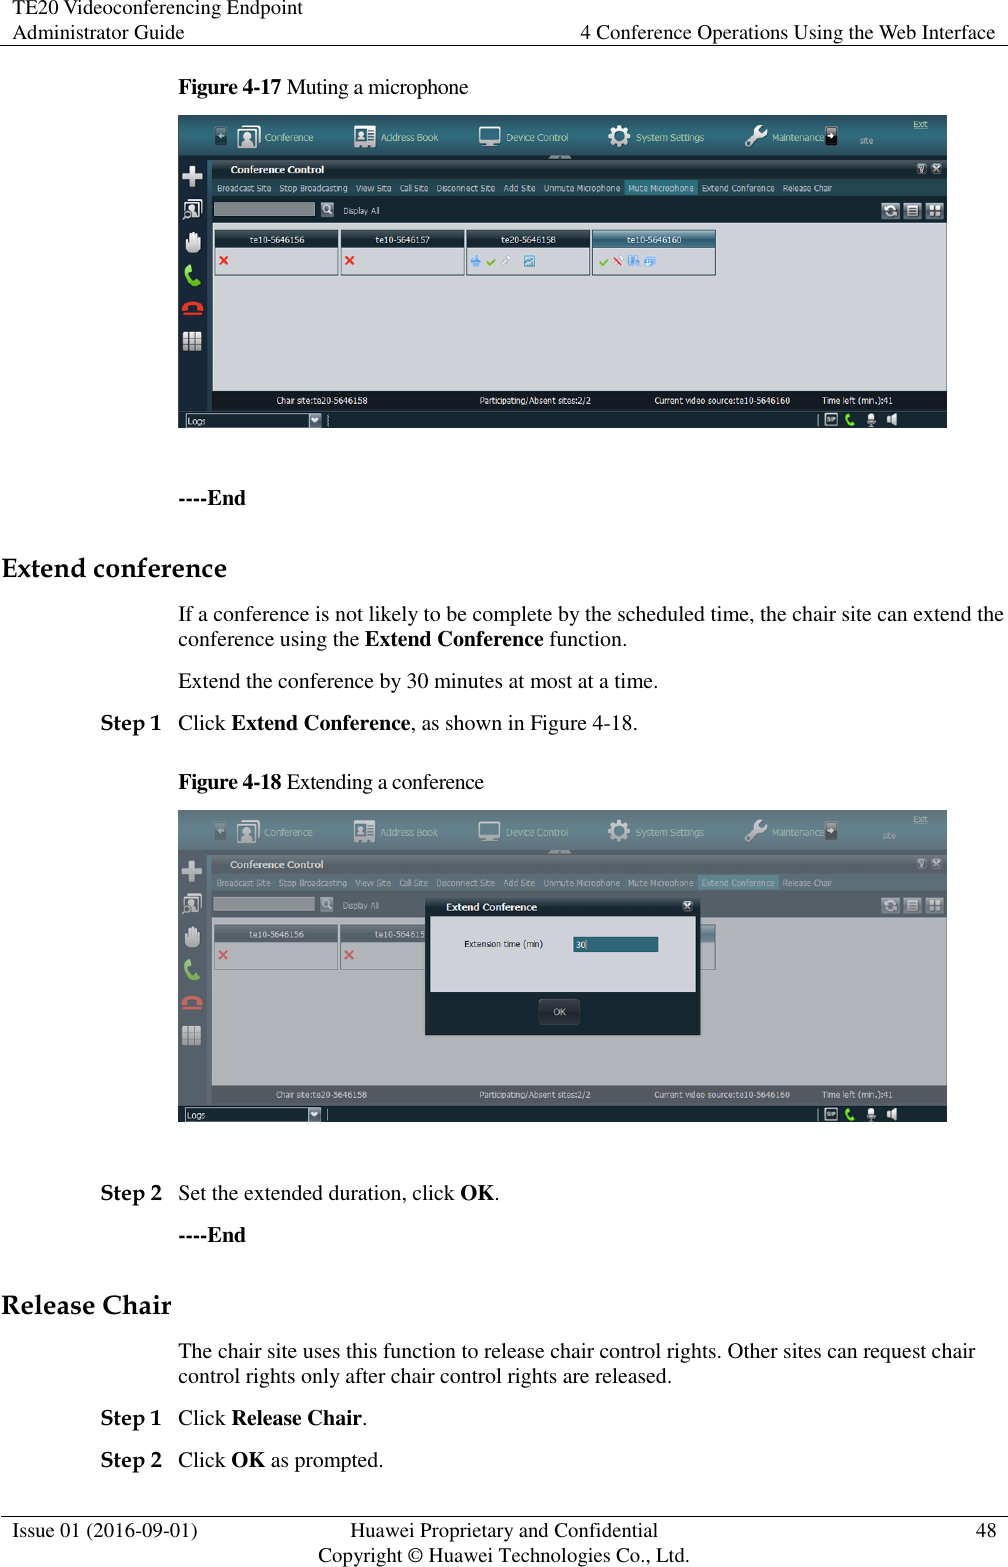 TE20 Videoconferencing Endpoint Administrator Guide 4 Conference Operations Using the Web Interface  Issue 01 (2016-09-01) Huawei Proprietary and Confidential                                     Copyright © Huawei Technologies Co., Ltd. 48  Figure 4-17 Muting a microphone   ----End Extend conference If a conference is not likely to be complete by the scheduled time, the chair site can extend the conference using the Extend Conference function. Extend the conference by 30 minutes at most at a time. Step 1 Click Extend Conference, as shown in Figure 4-18. Figure 4-18 Extending a conference   Step 2 Set the extended duration, click OK. ----End Release Chair The chair site uses this function to release chair control rights. Other sites can request chair control rights only after chair control rights are released. Step 1 Click Release Chair. Step 2 Click OK as prompted. 